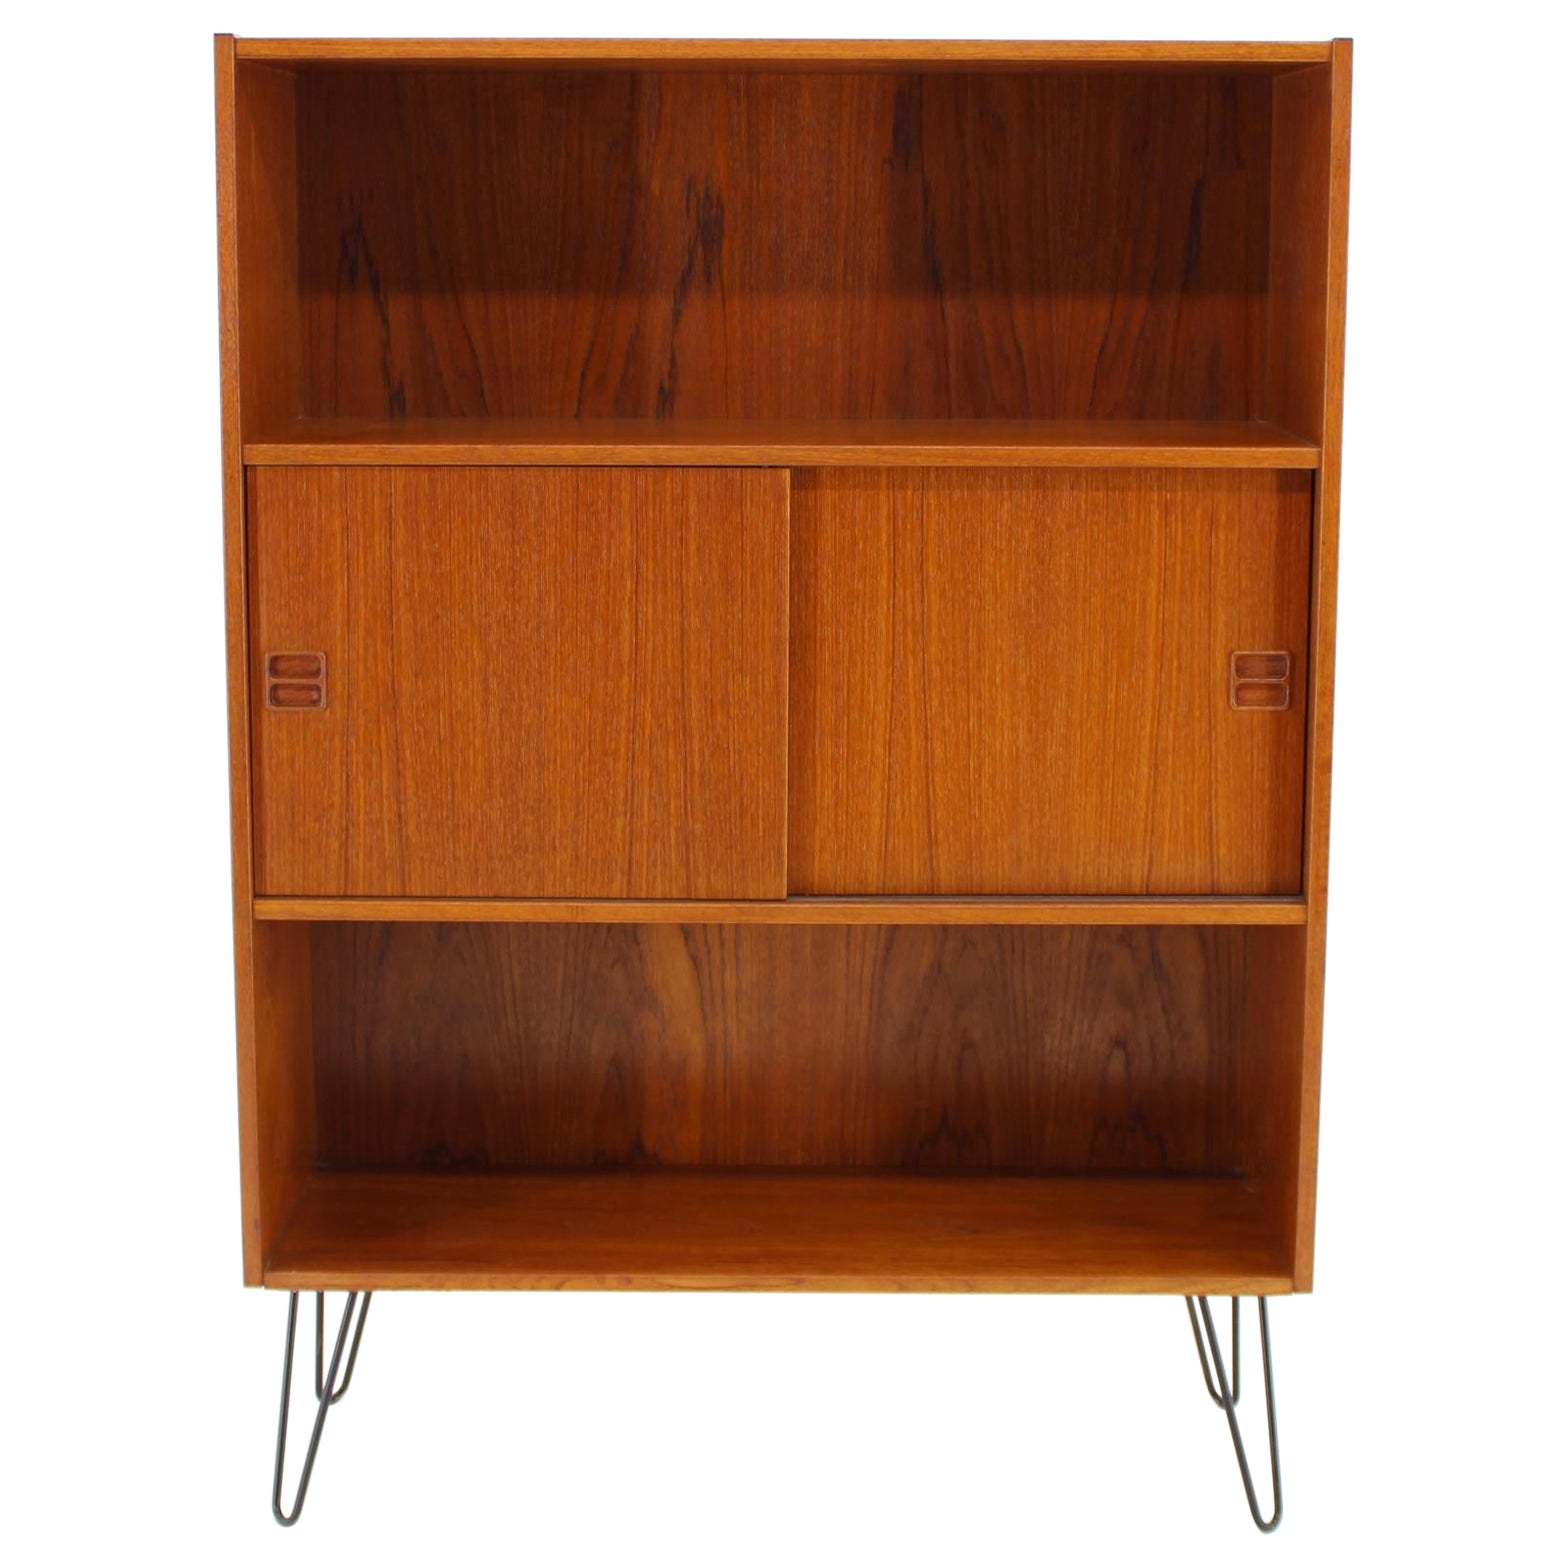 1960s Upcycled Bookcase with Sliding Doors, Denmark For Sale